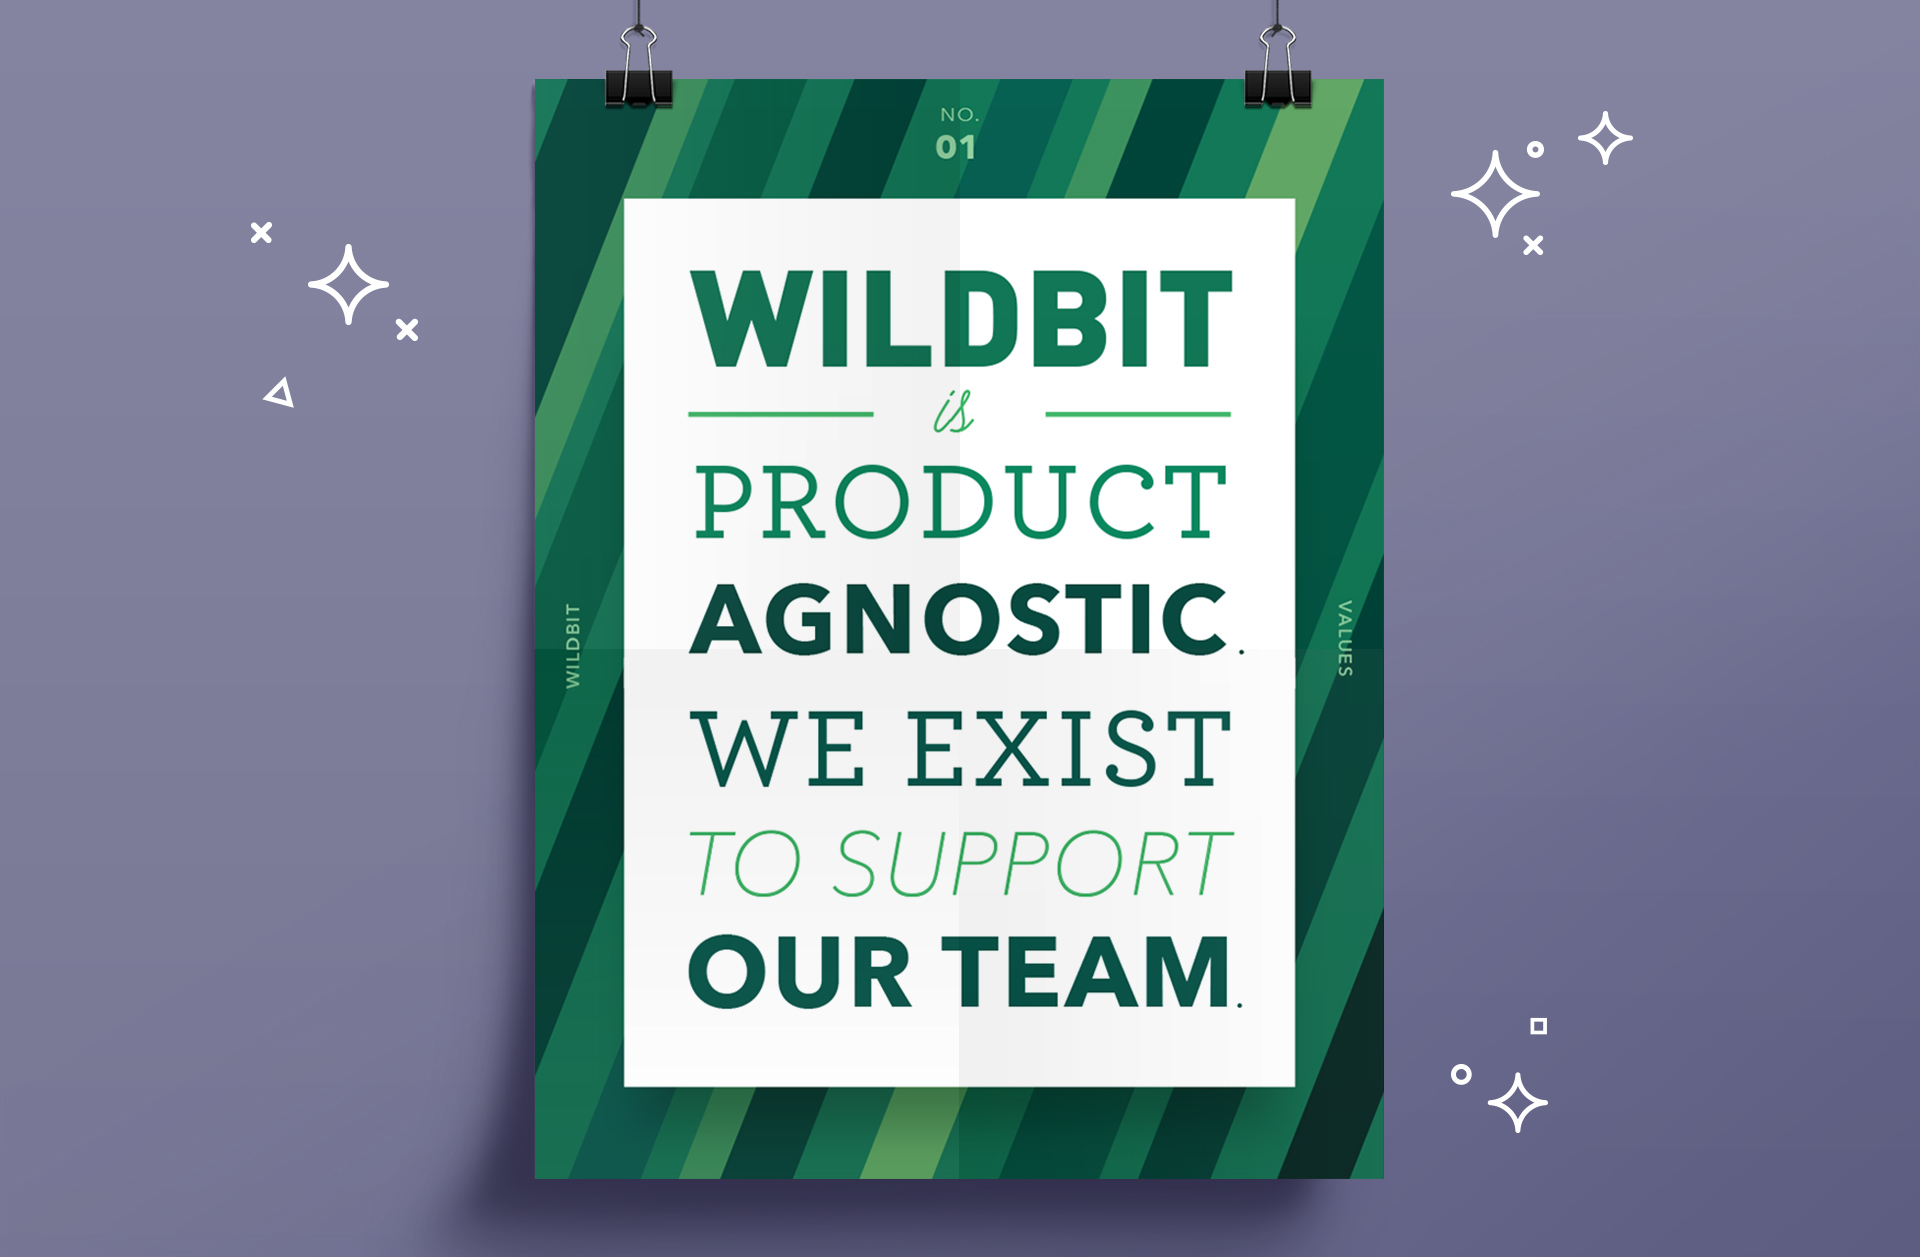 Wildbit is product agnostic. We exist to support our team.